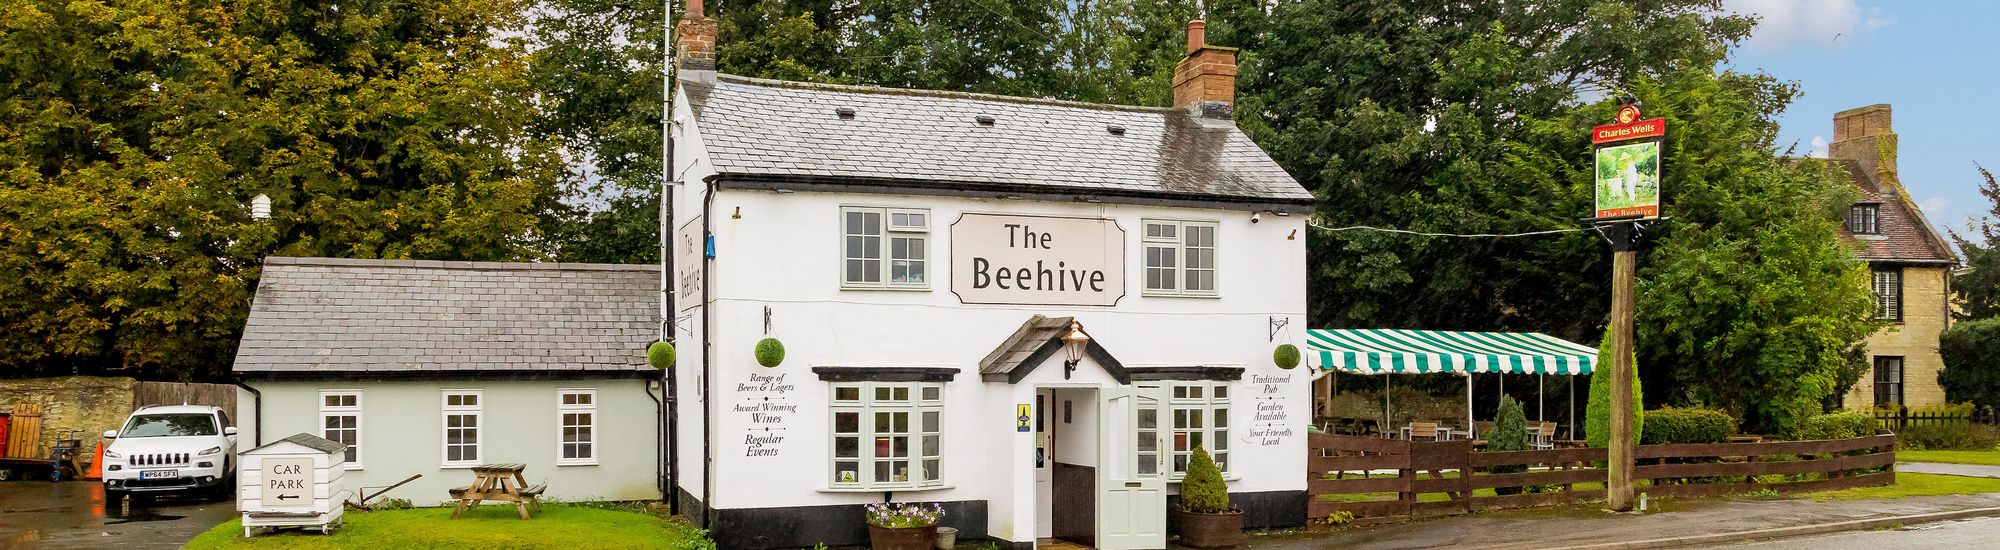 The Beehive - Deanshanger